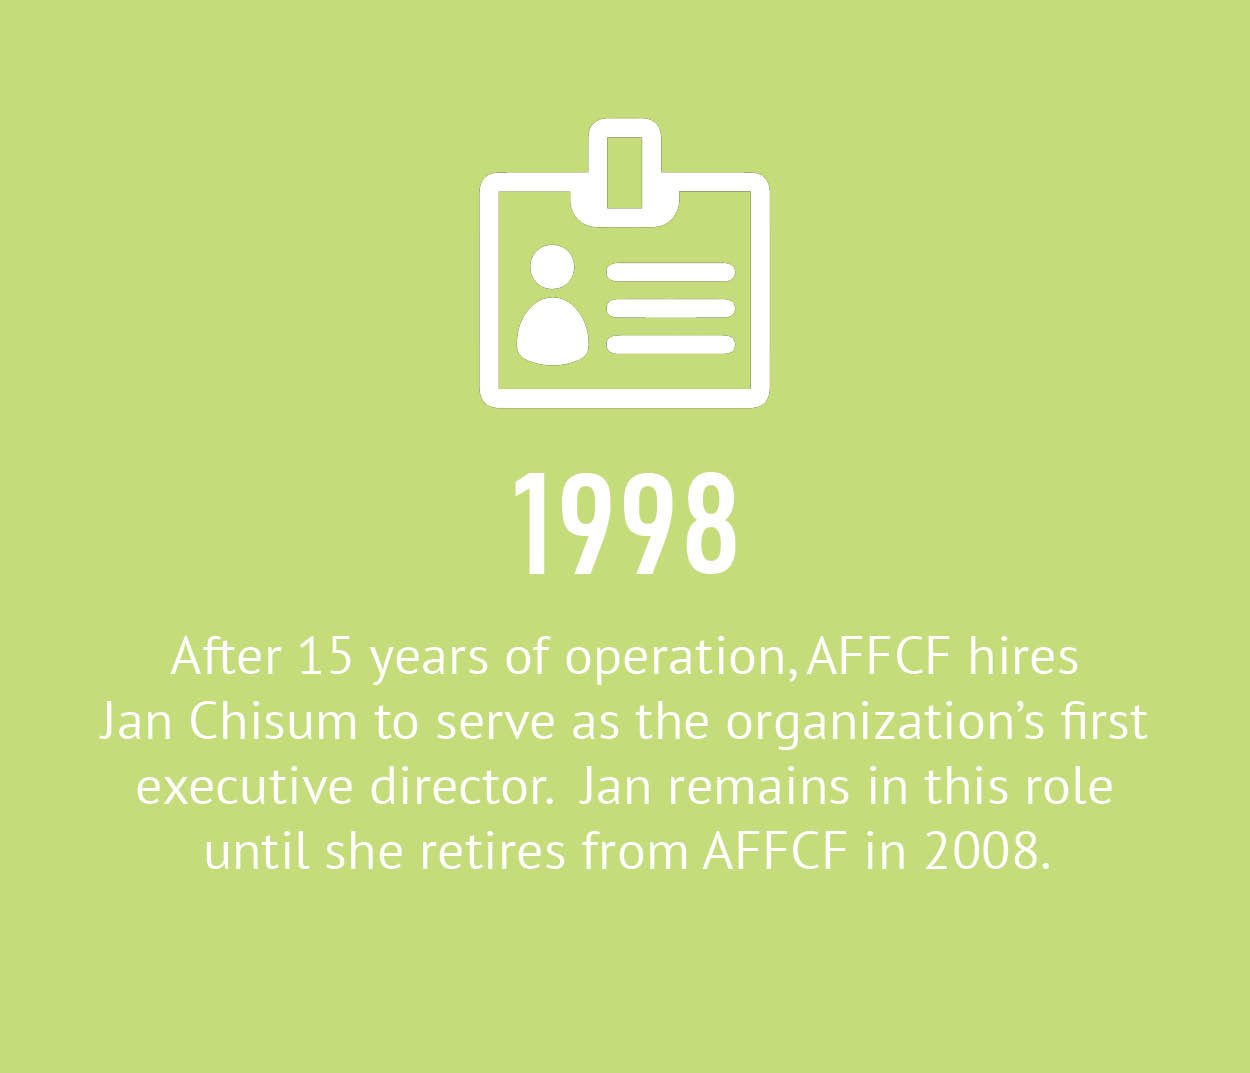 1998 - After 15 years of operation, AFFCF hires Jan Chisum to serve as the organization's first executive director. Jan remains in this role until she retires from AFFCF in 2008.